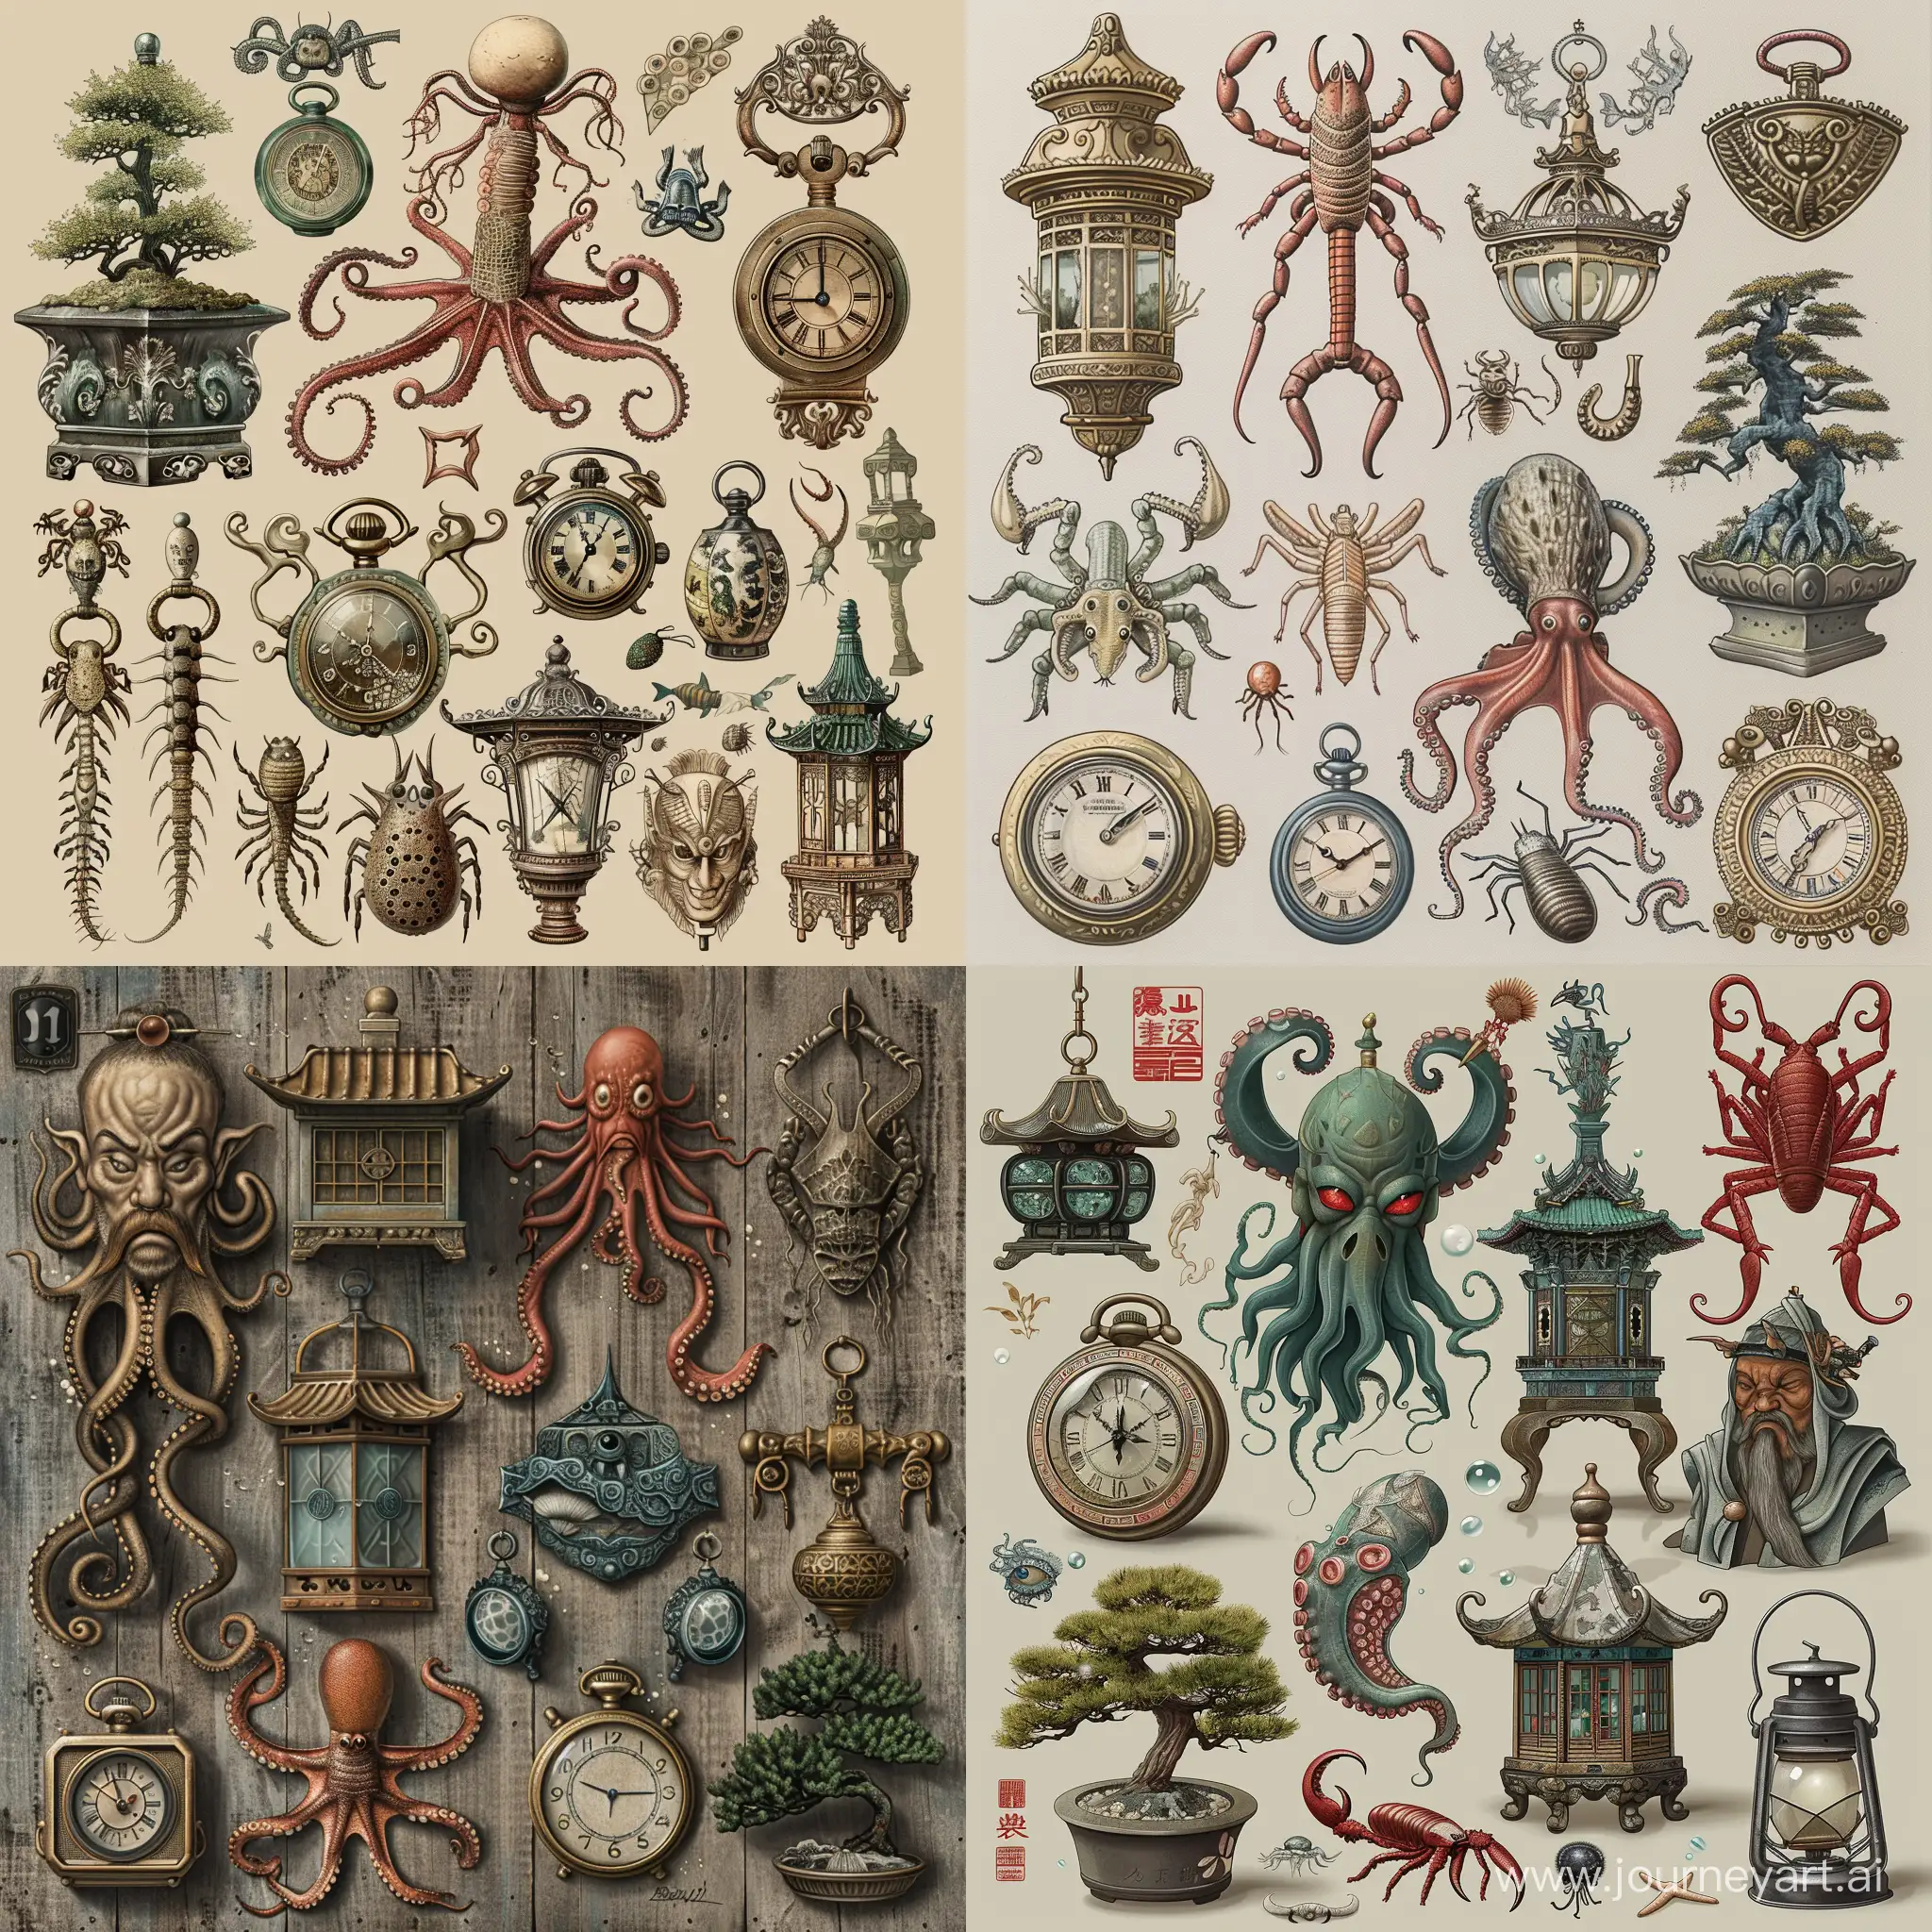 insane detail, deep sea creatures, scropion, centipede, maggots, octopus, squid,  evil god,  myth creatures,  creepy and scary, perfect exact rendering, pocket watch, lantern,  bonsai, perfect exact rendering, embellished and intricate architectural ornamentations, many china and japan artifacts